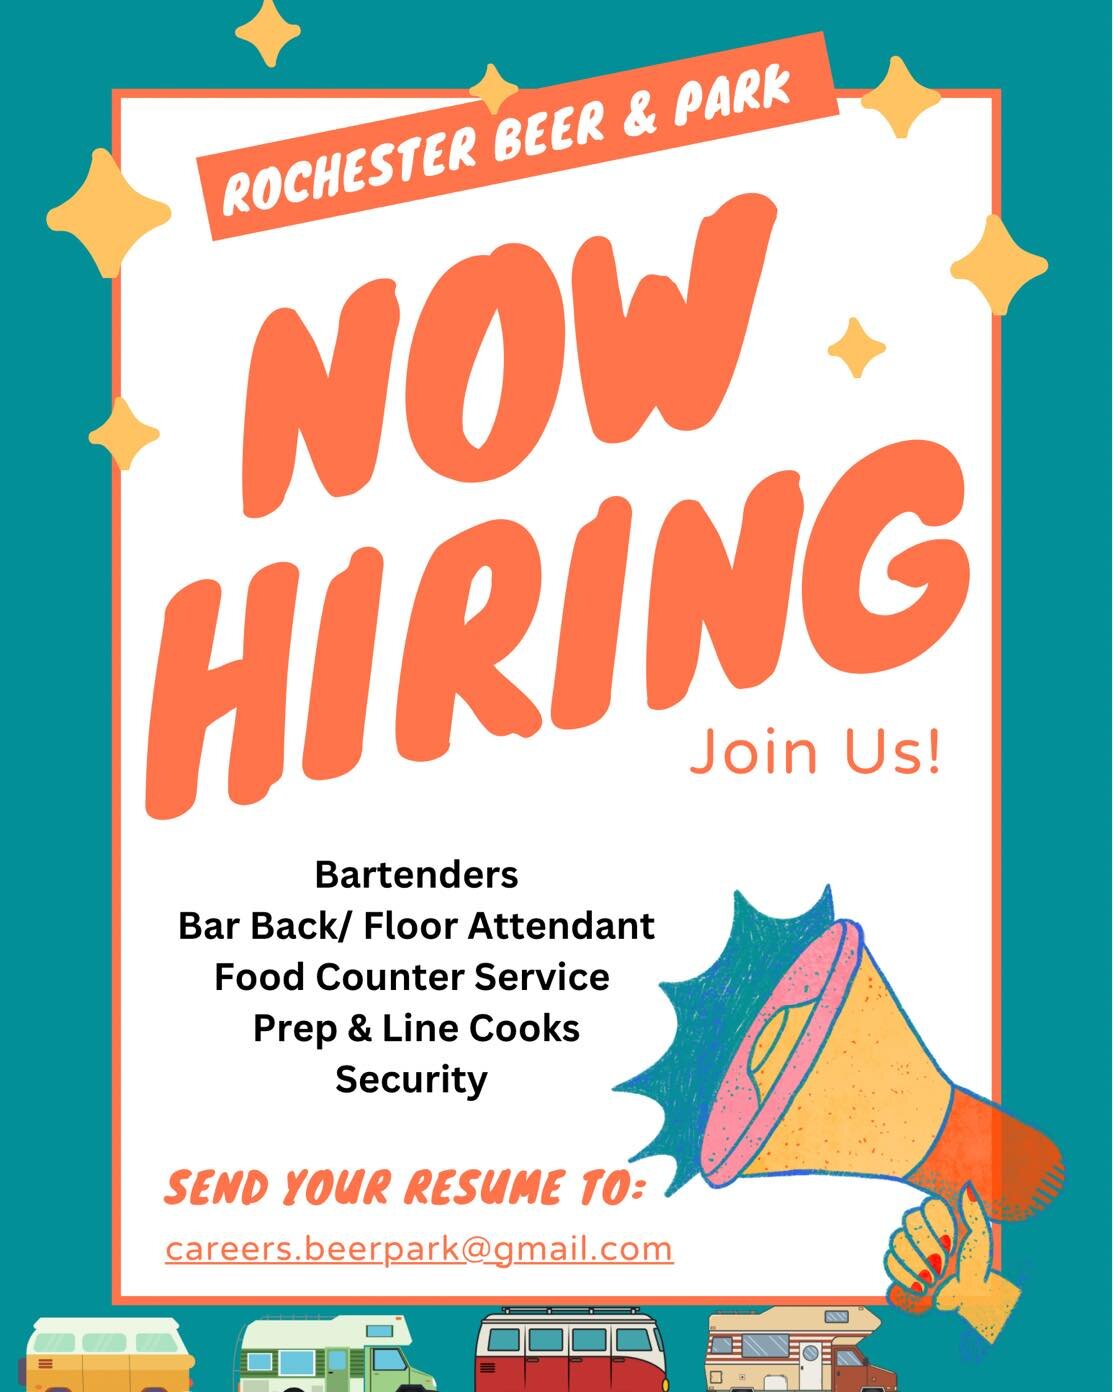 Join our team! Now hiring for all positions 🍻🦩
Send your resume to careers.beerpark@gmail.com
#wemakehappycampers #drinkcraftbeer #happycampers #RBP #teamworkmakesthedreamwork